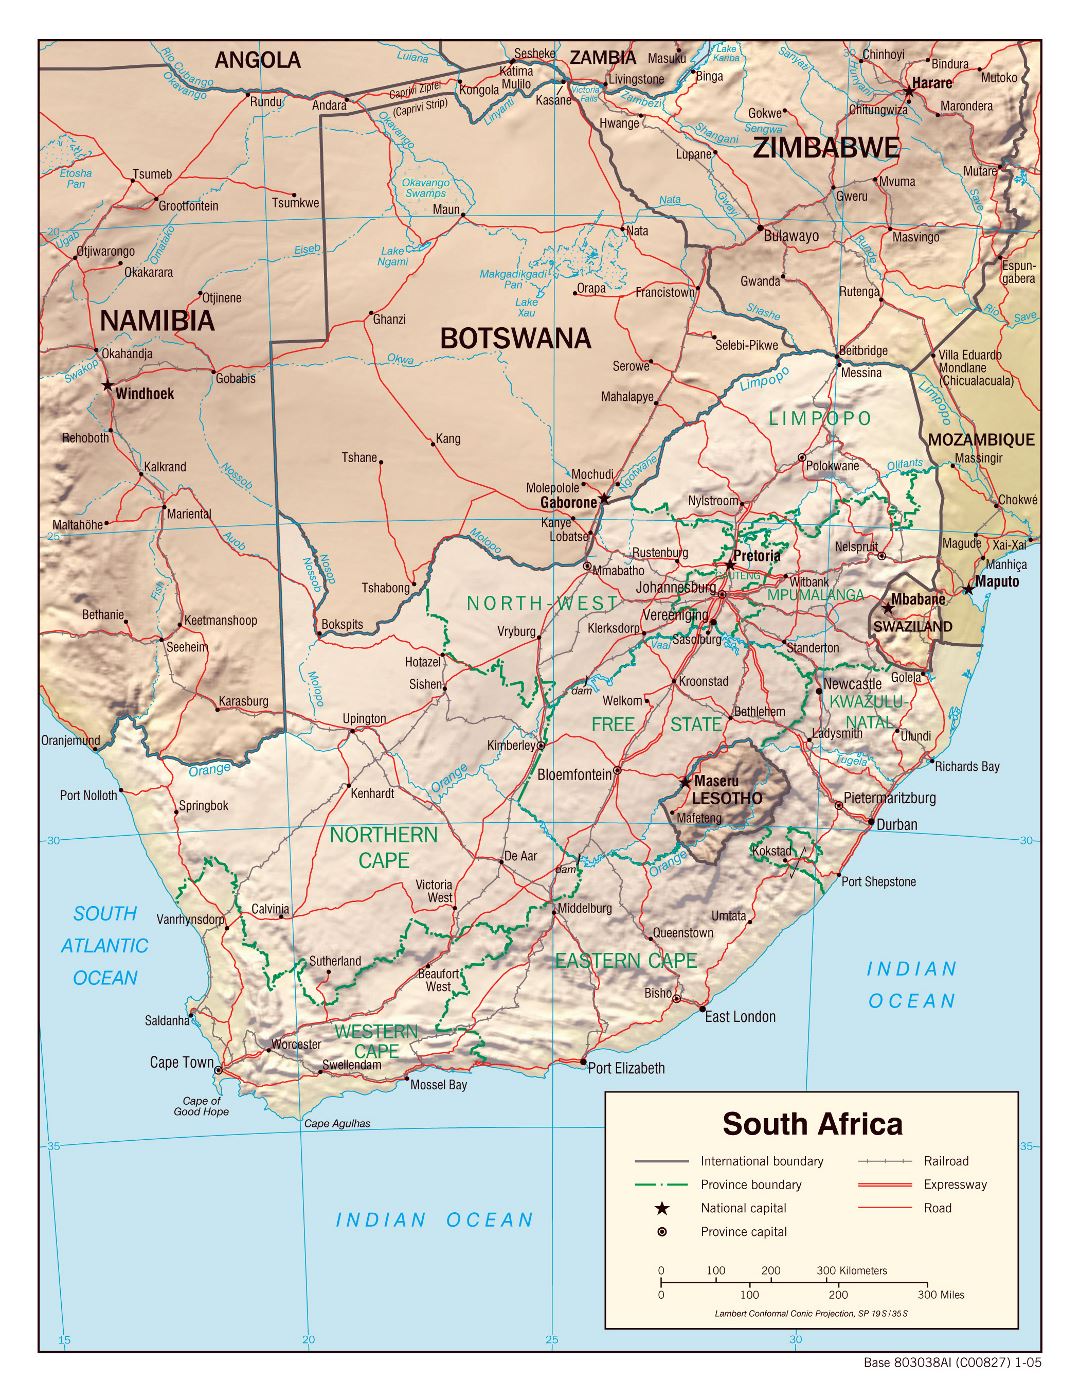 Large political and administrative map of South Africa with relief, roads, railroads and major cities - 2005